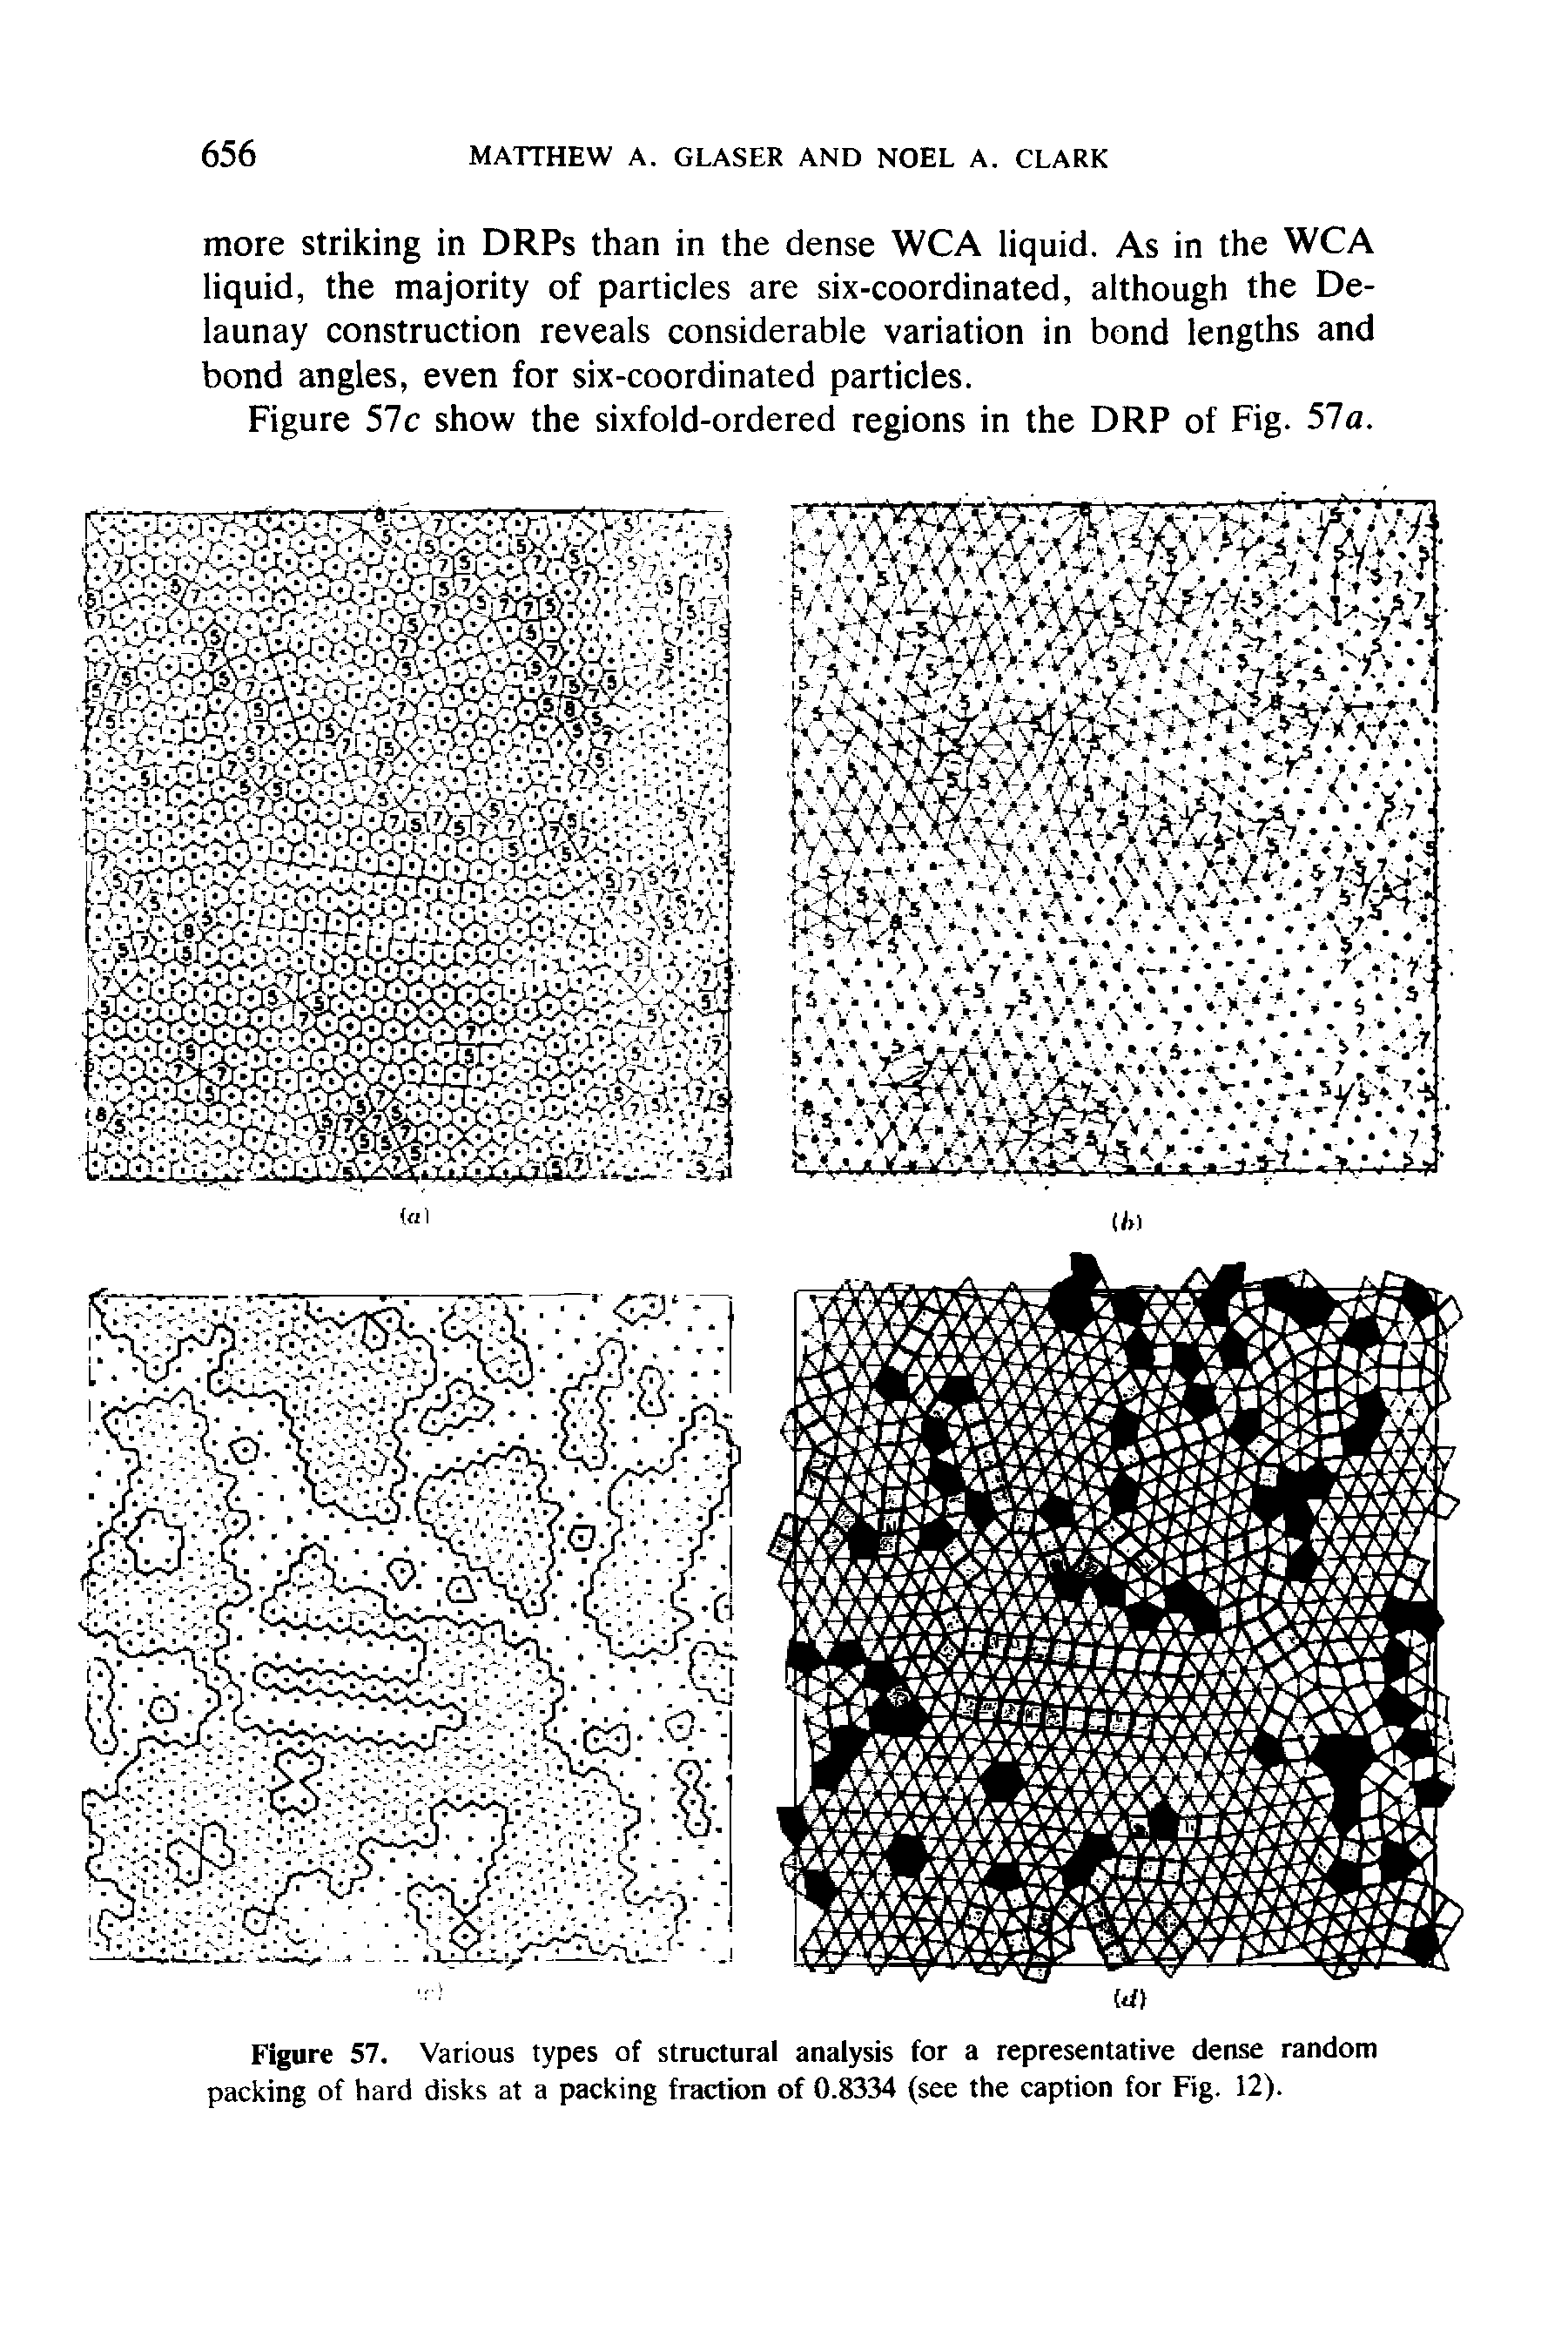 Figure 57. Various types of structural analysis for a representative dense random packing of hard disks at a packing fraction of 0.8334 (see the caption for Fig. 12).